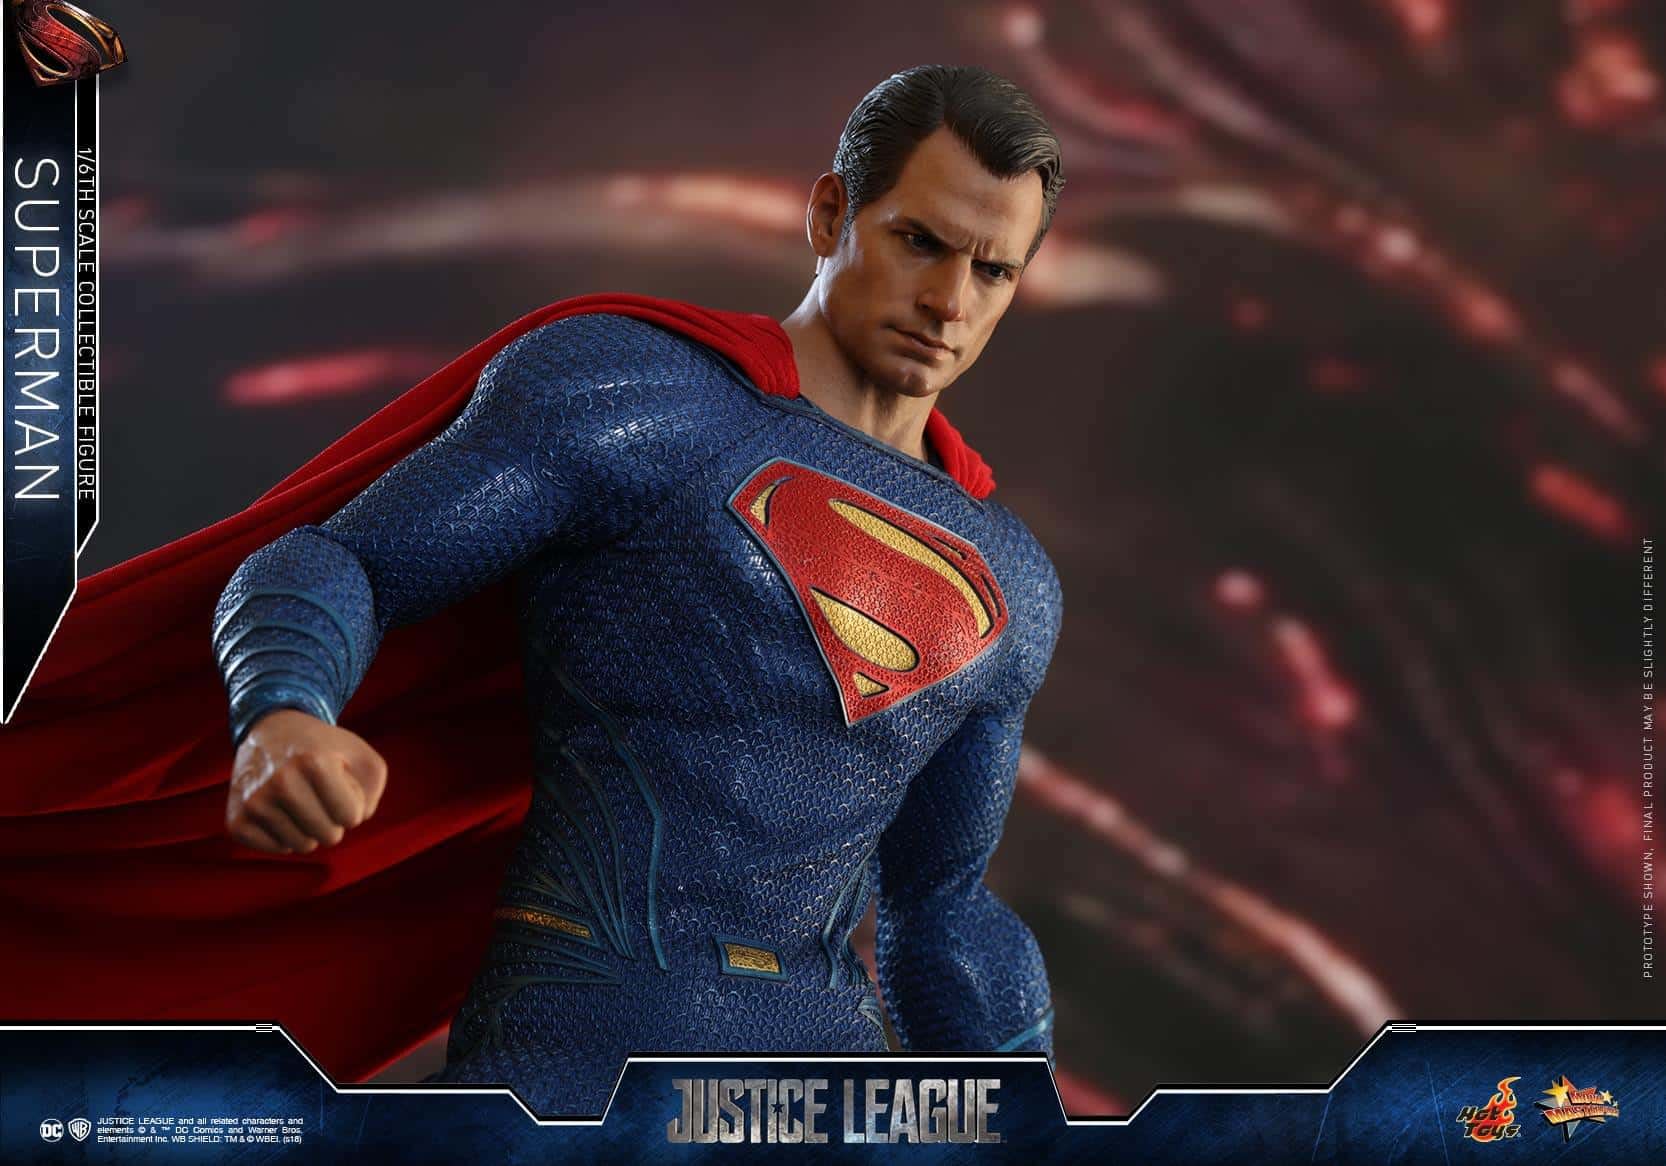 Hot Toys Man of Steel Superman sixth scale action figure